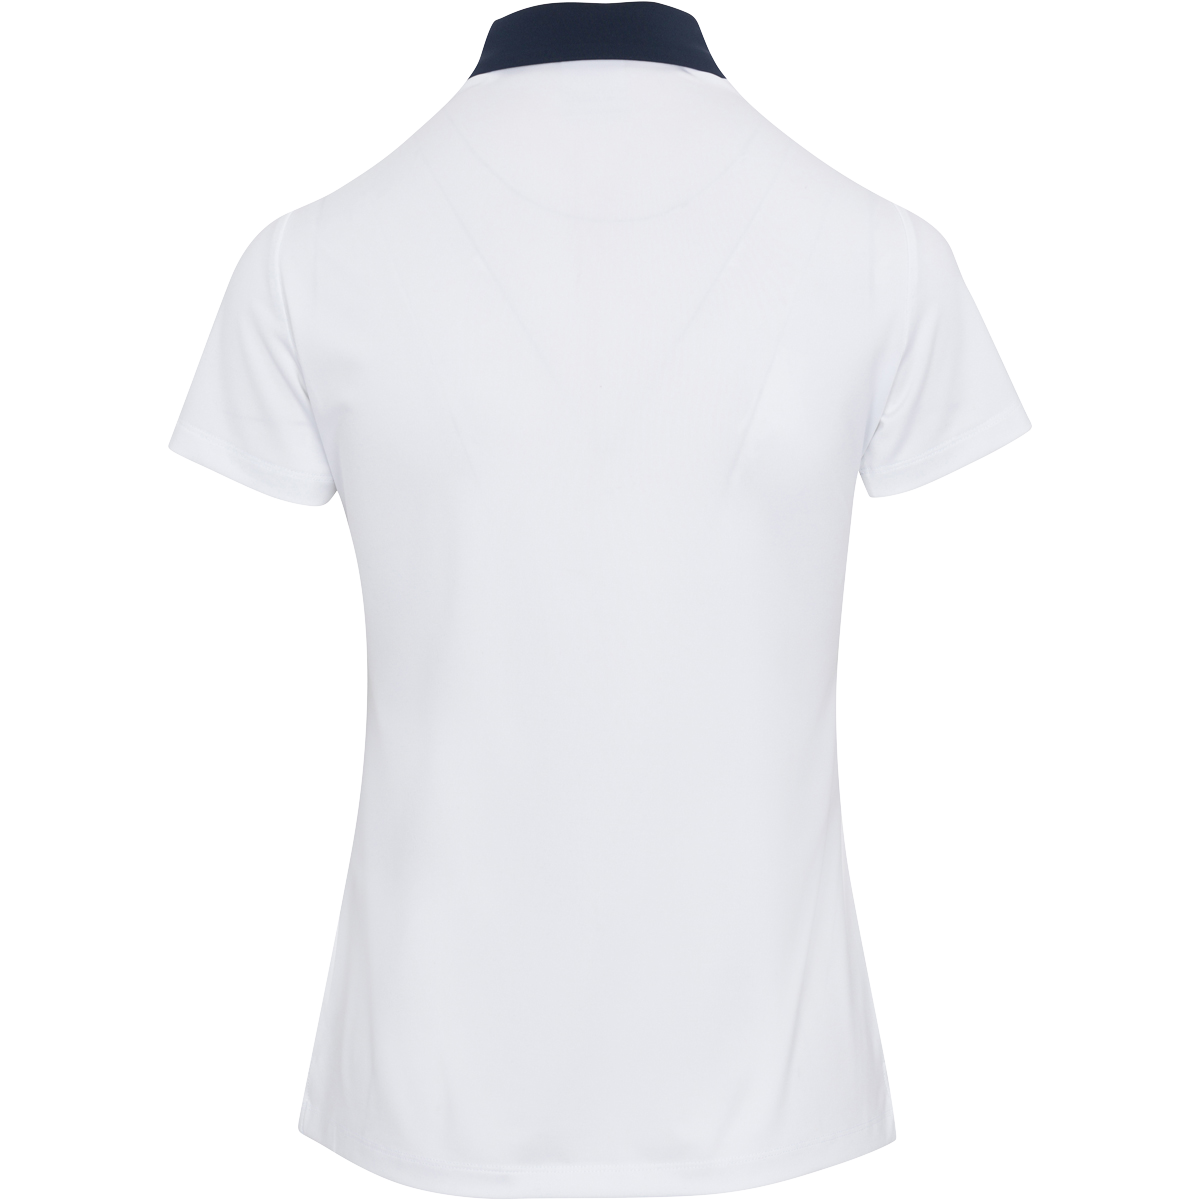 Dunning 2023 LPGA Official Solheim Cup Team Uniform Women's Short Sleeve Performance Polo in White - Back View